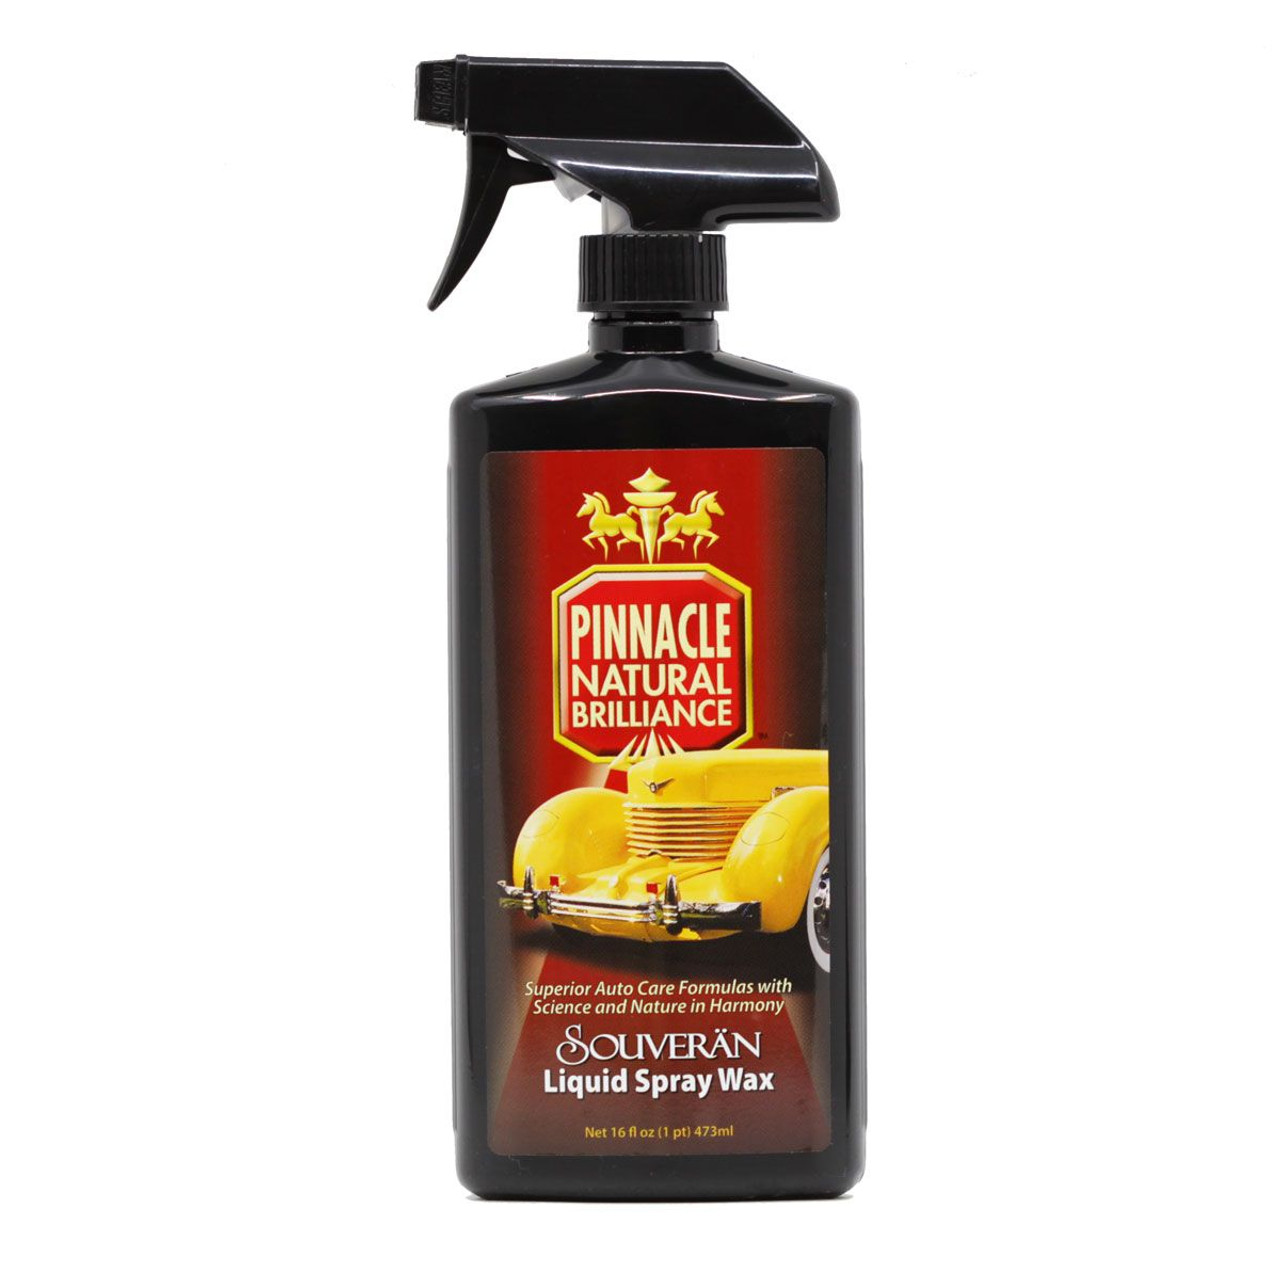 Pinnacle Souvern Liquid Spray Wax shines and protects all types